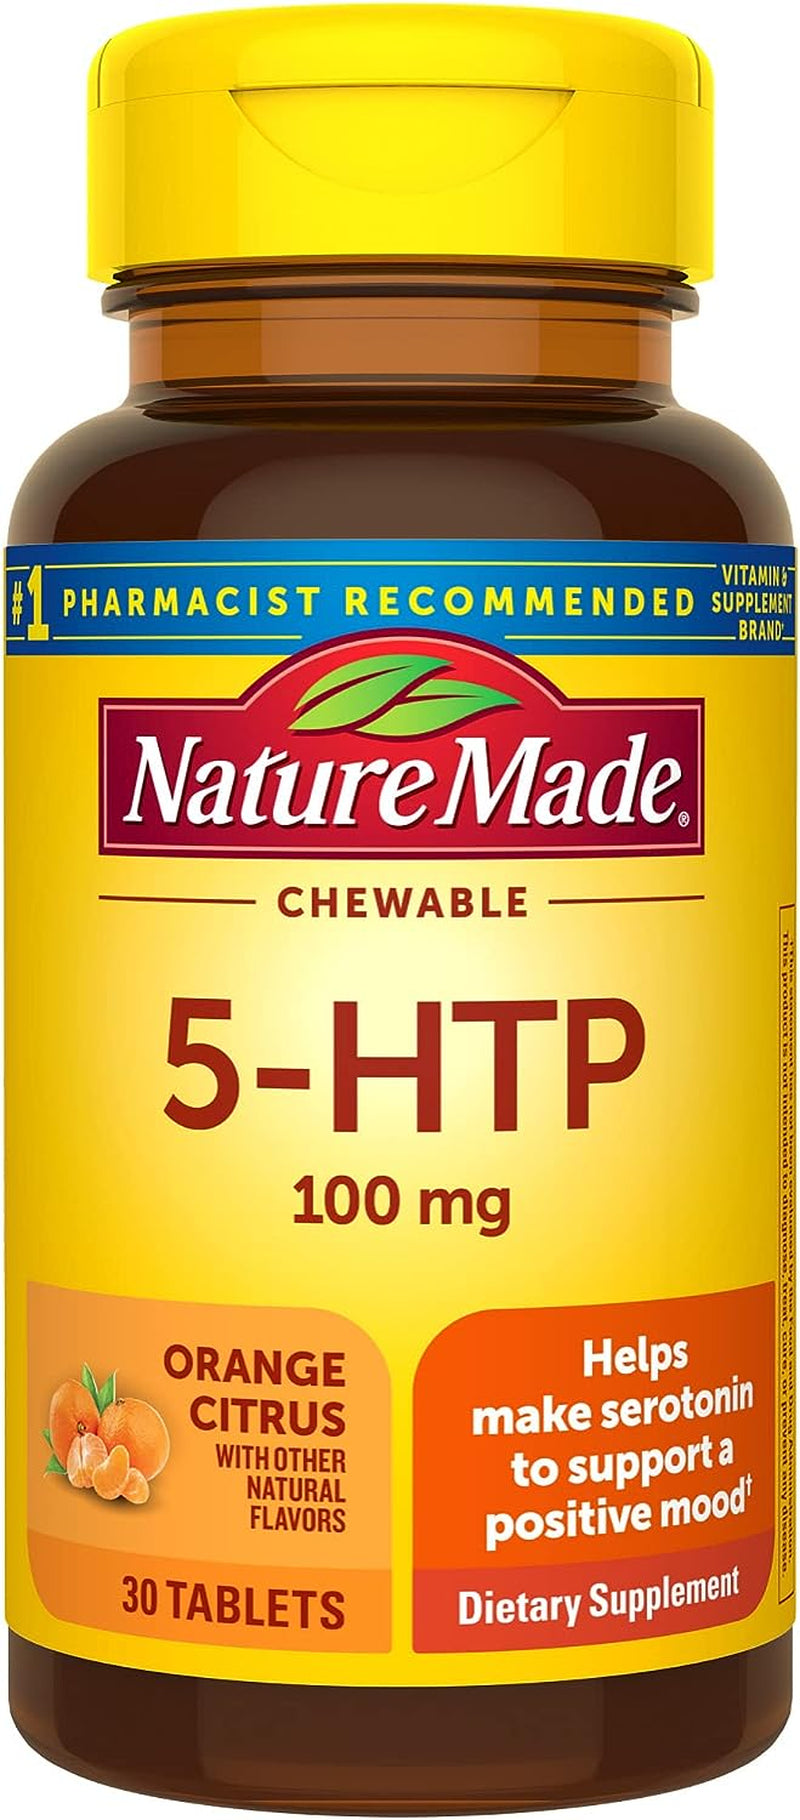 Nature Made Chewable 5HTP 100Mg, 5-HTP Mood Support Supplement, 30 5 HTP Chewable Tablets, 30 Day Supply